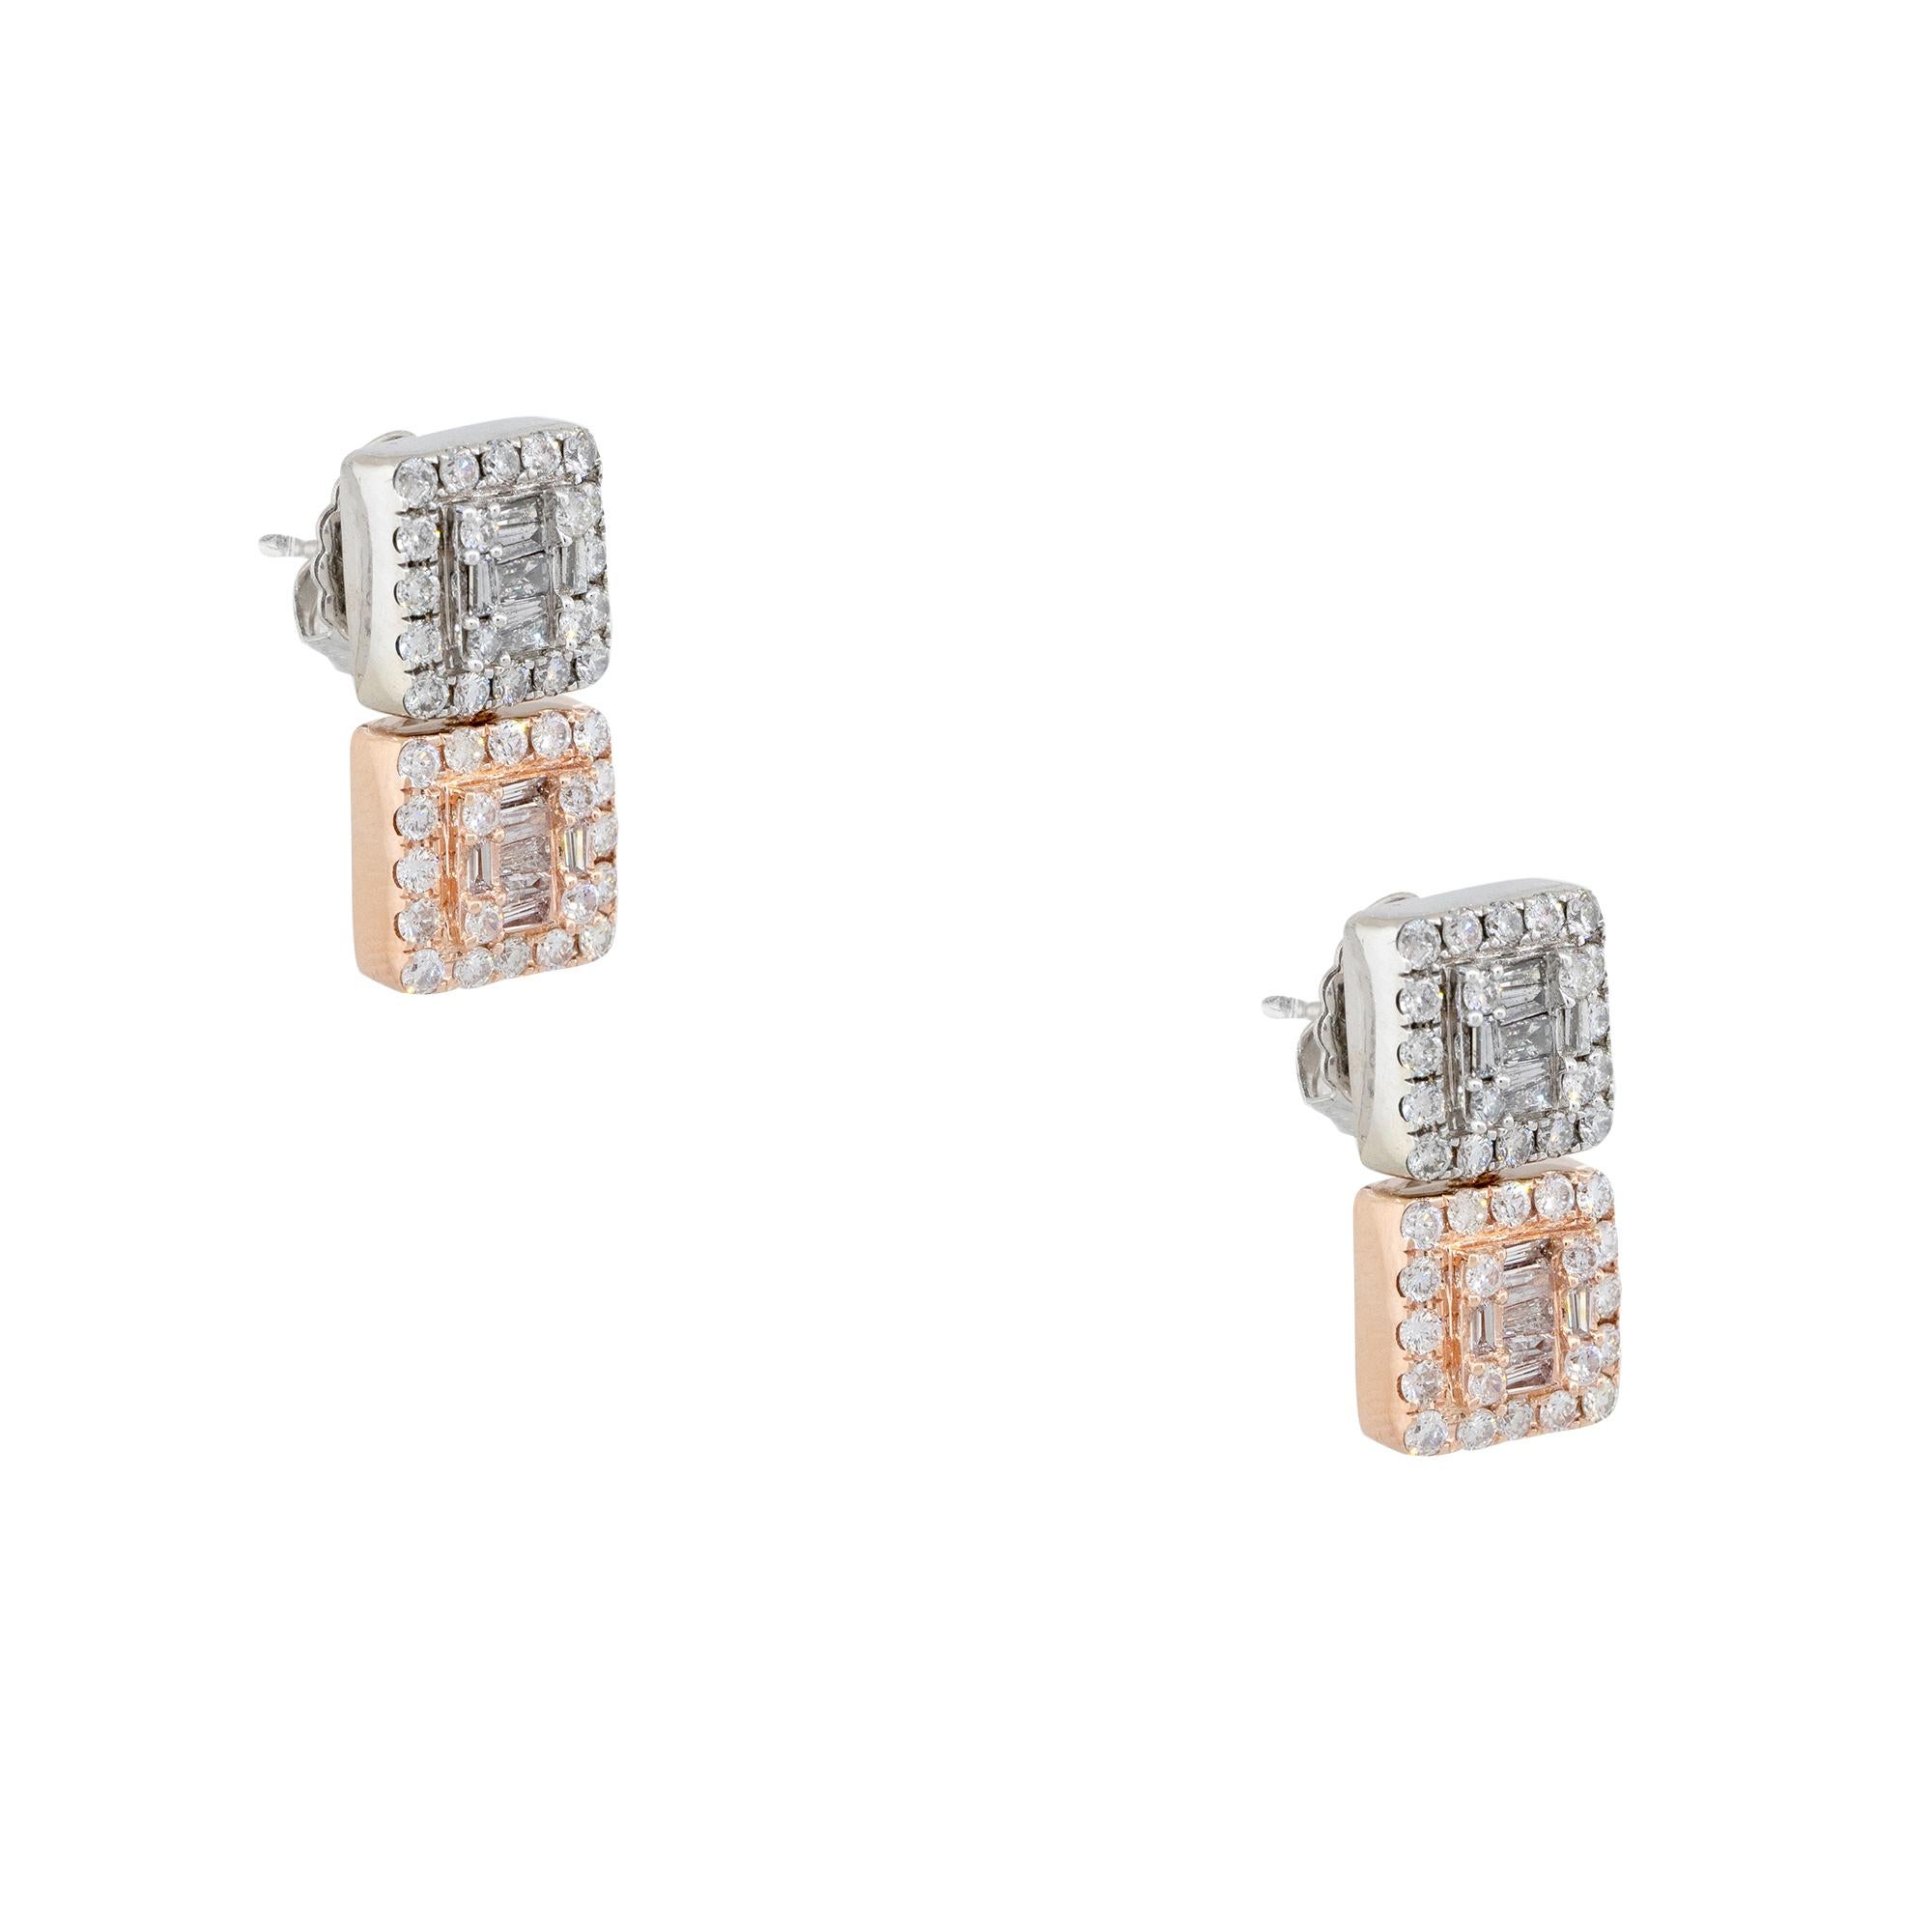 14k White & Rose Gold 1.48ctw Round Brilliant & Baguette Cut Diamond Mosaic Square Earrings

Product: Mosaic Diamond Square Earrings
Diamonds: All natural diamonds
Material: 14k White & Rose Gold
Diamond Details: There are approximately 1.20 carats